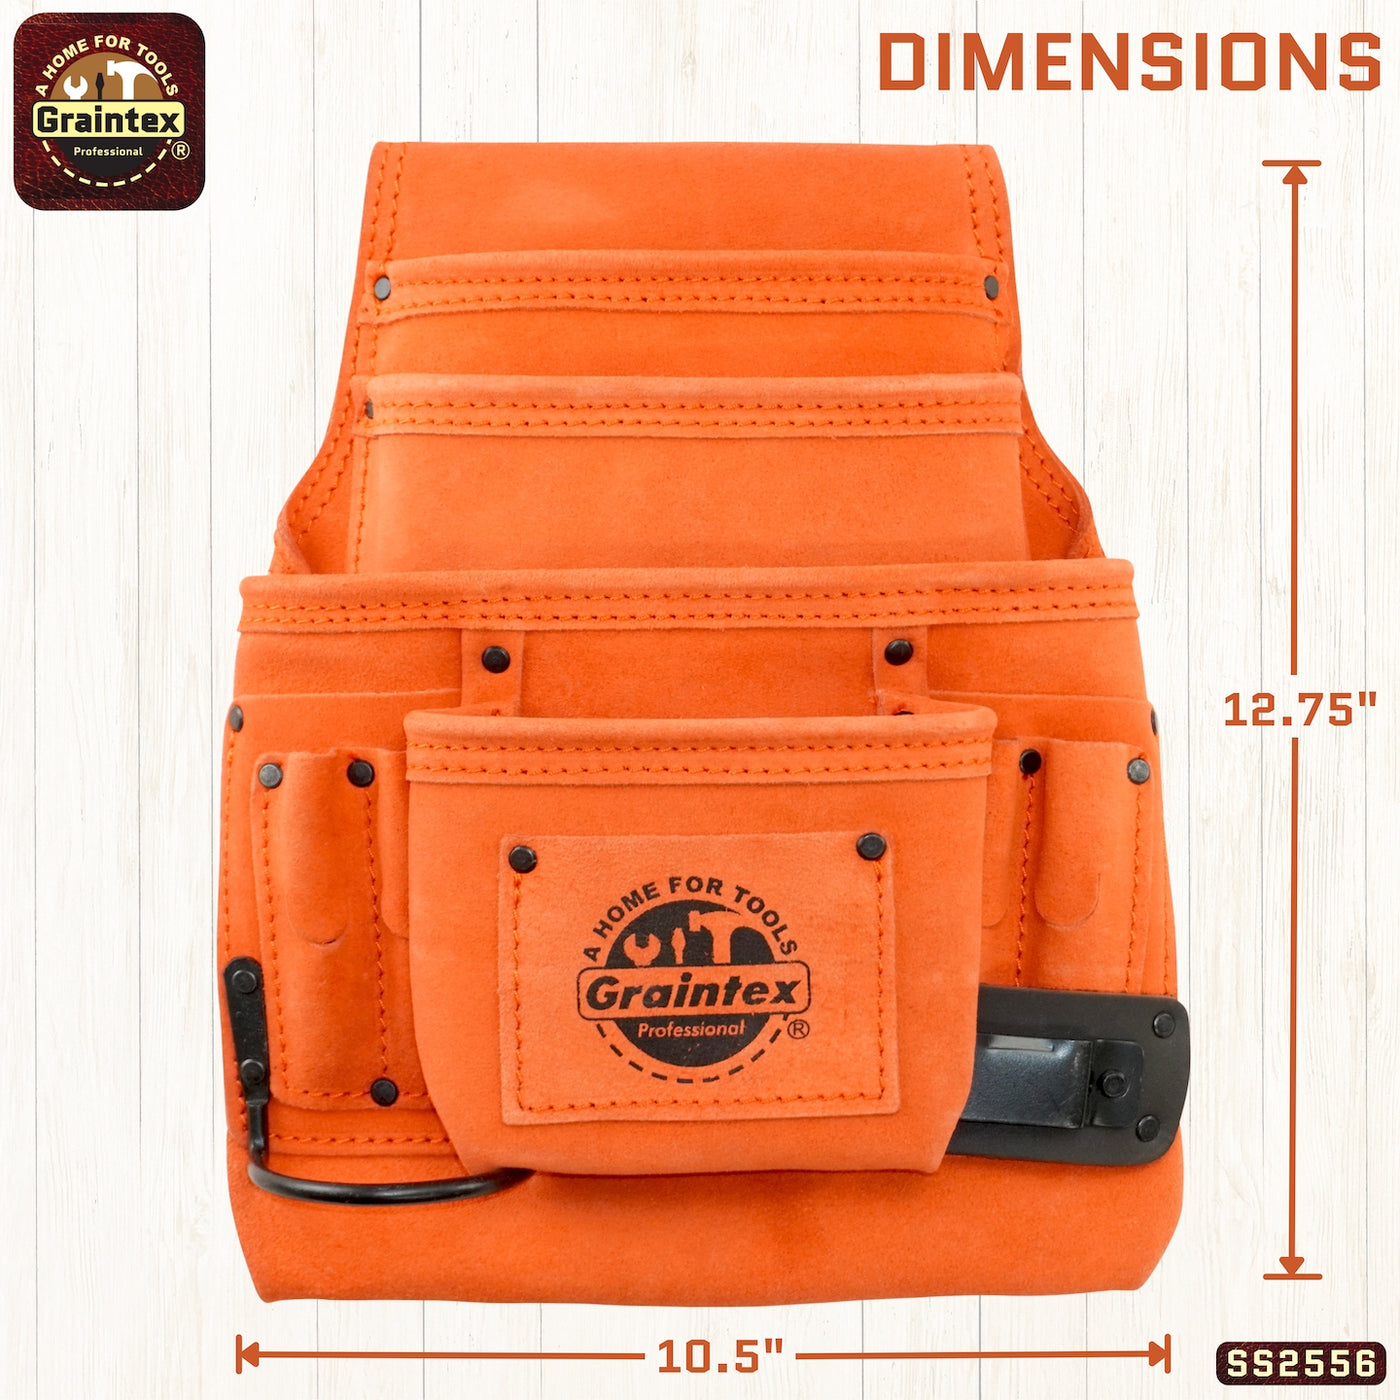 SS2556 :: 10 Pocket Nail & Tool Pouch Orange Color Suede Leather